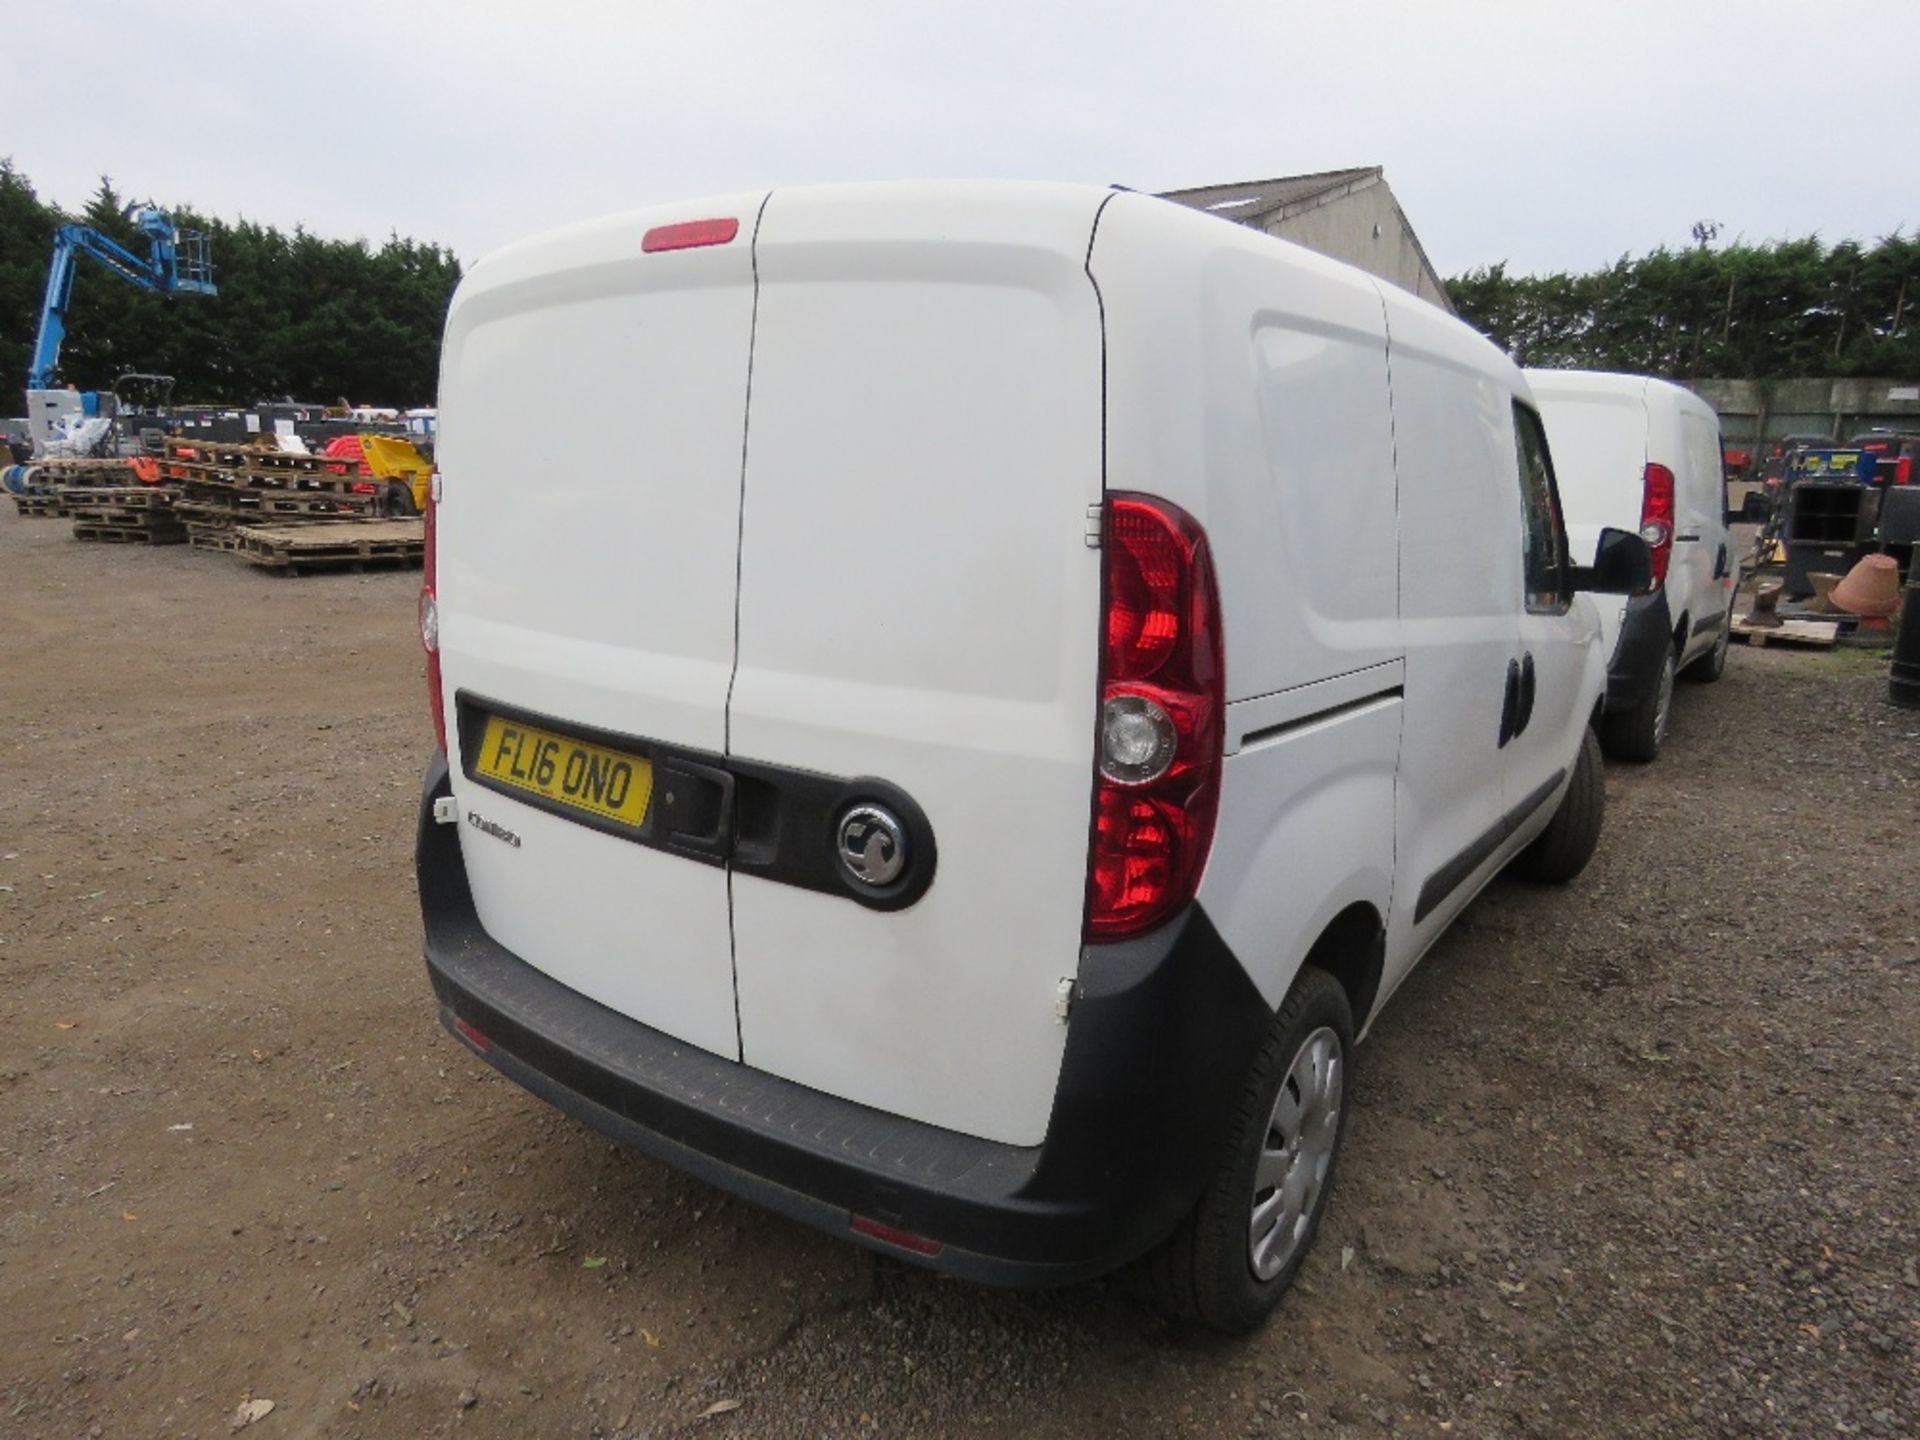 VAUXHALL COMBO L1H1-CDTI FIVE SEATER VAN REG: FL16 ONO. 98, 248 RECORDED MILES. 2 KEYS. WITH V5 (OWN - Image 5 of 21